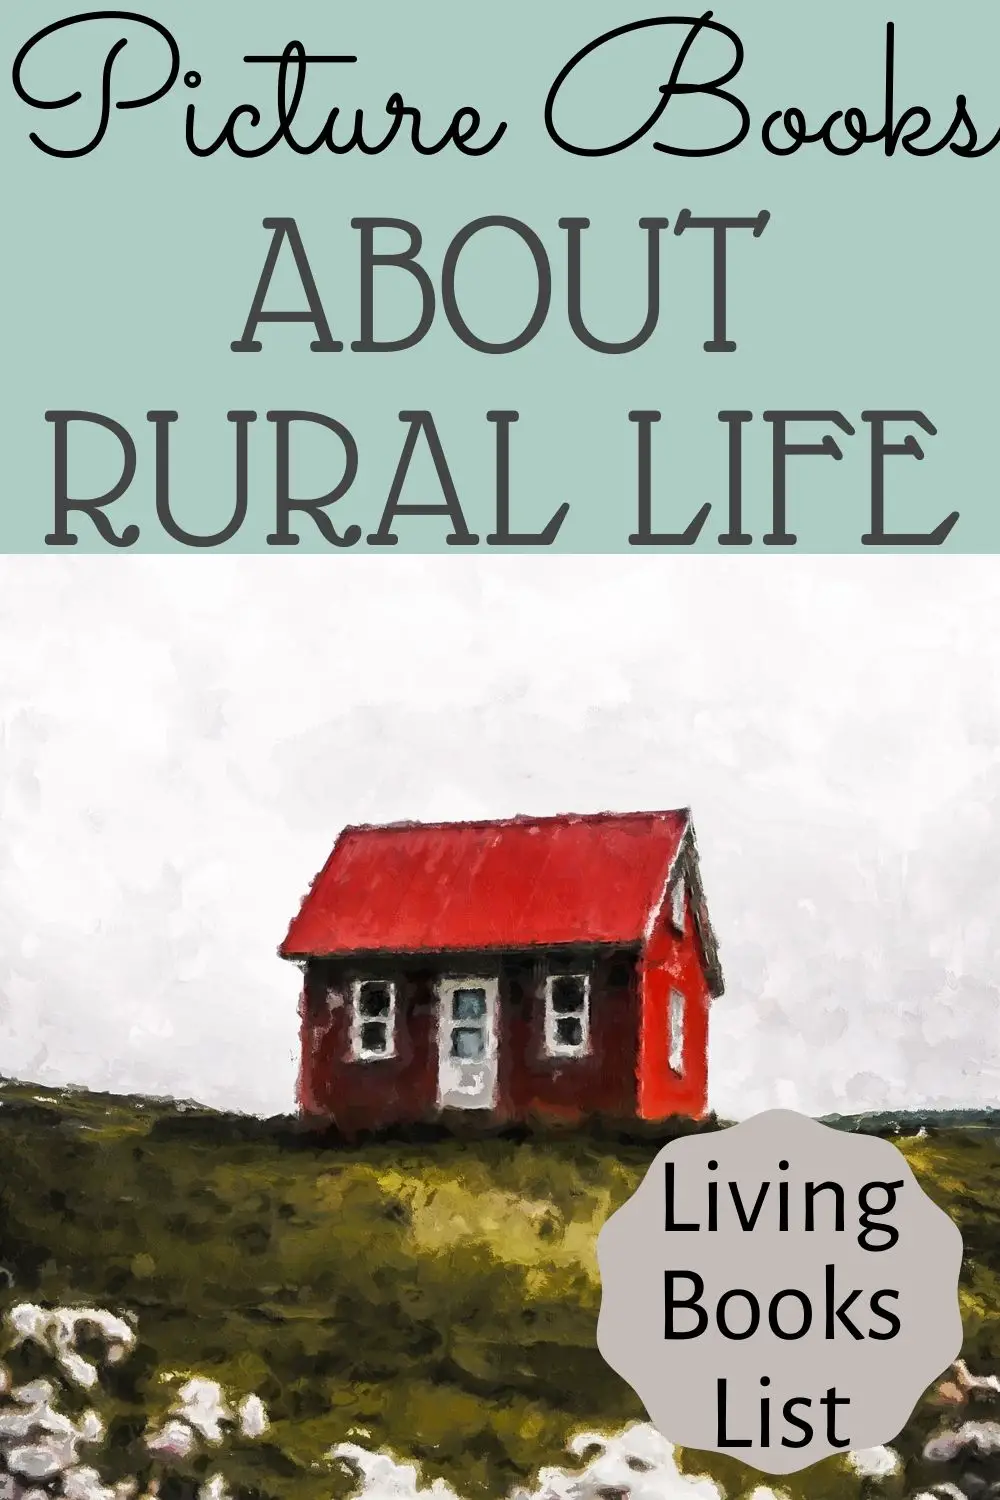 living picture books about rural life pinterest pin with red farmhouse painting